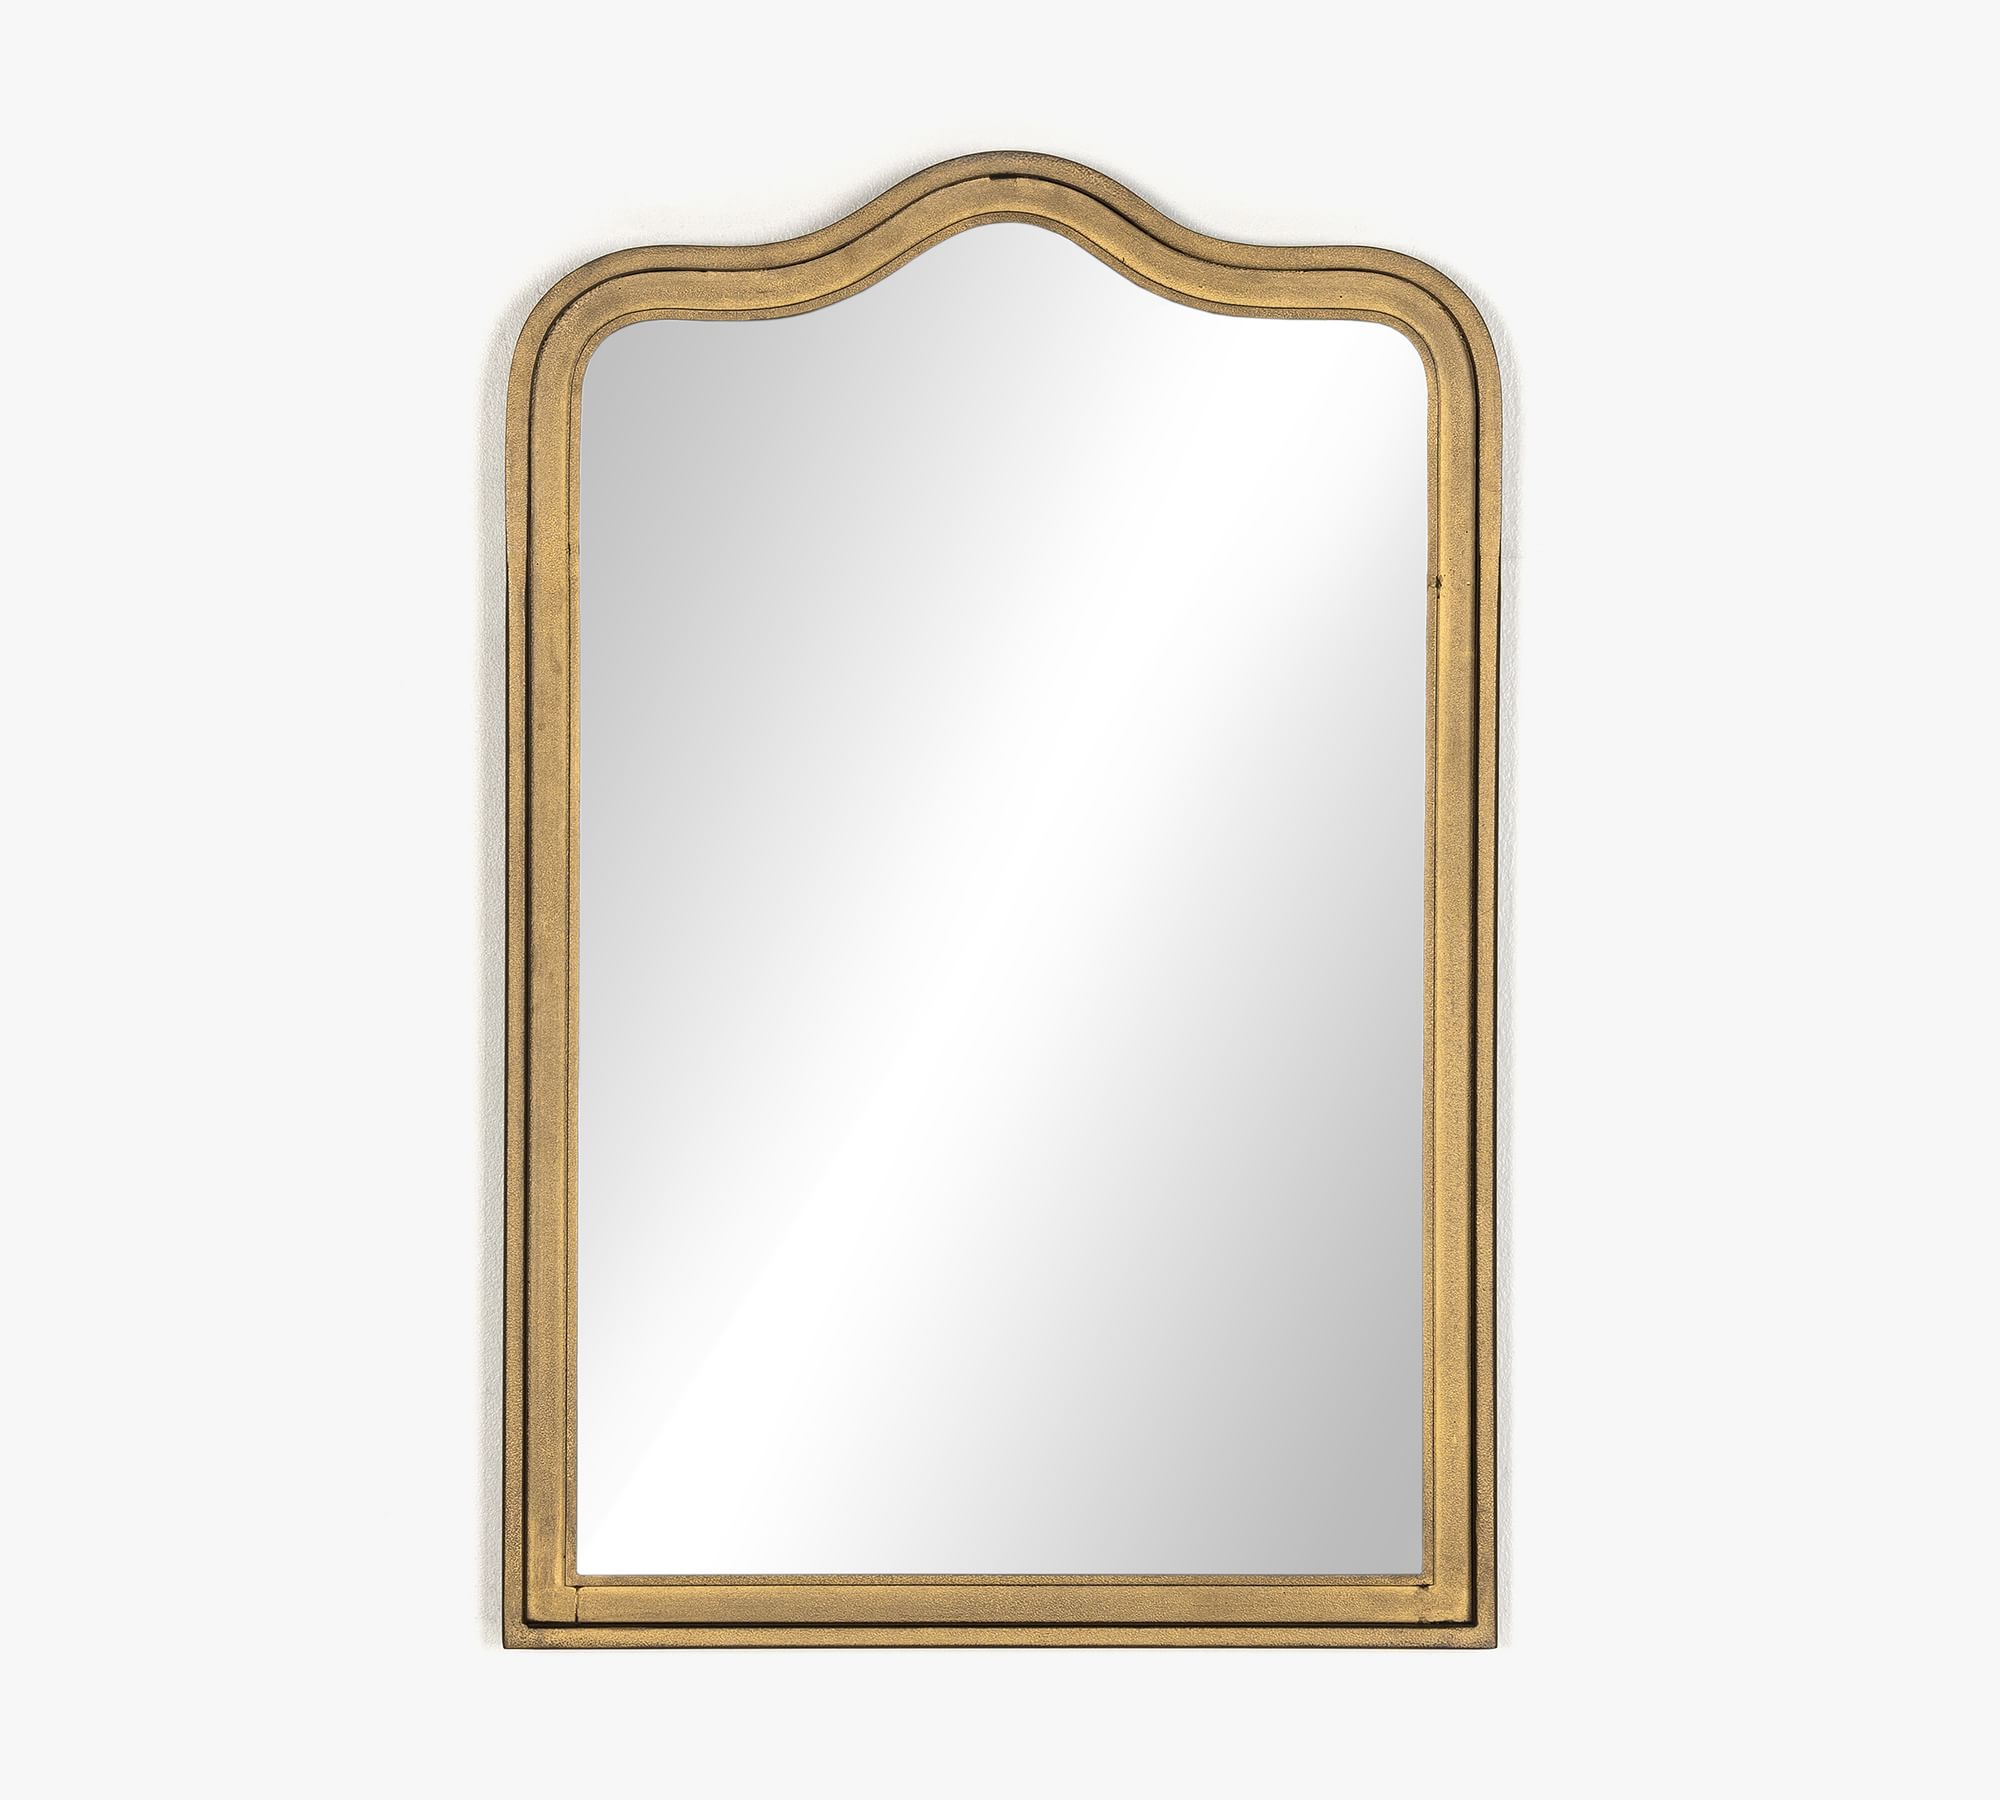 Sansome Arch Wall Mirror